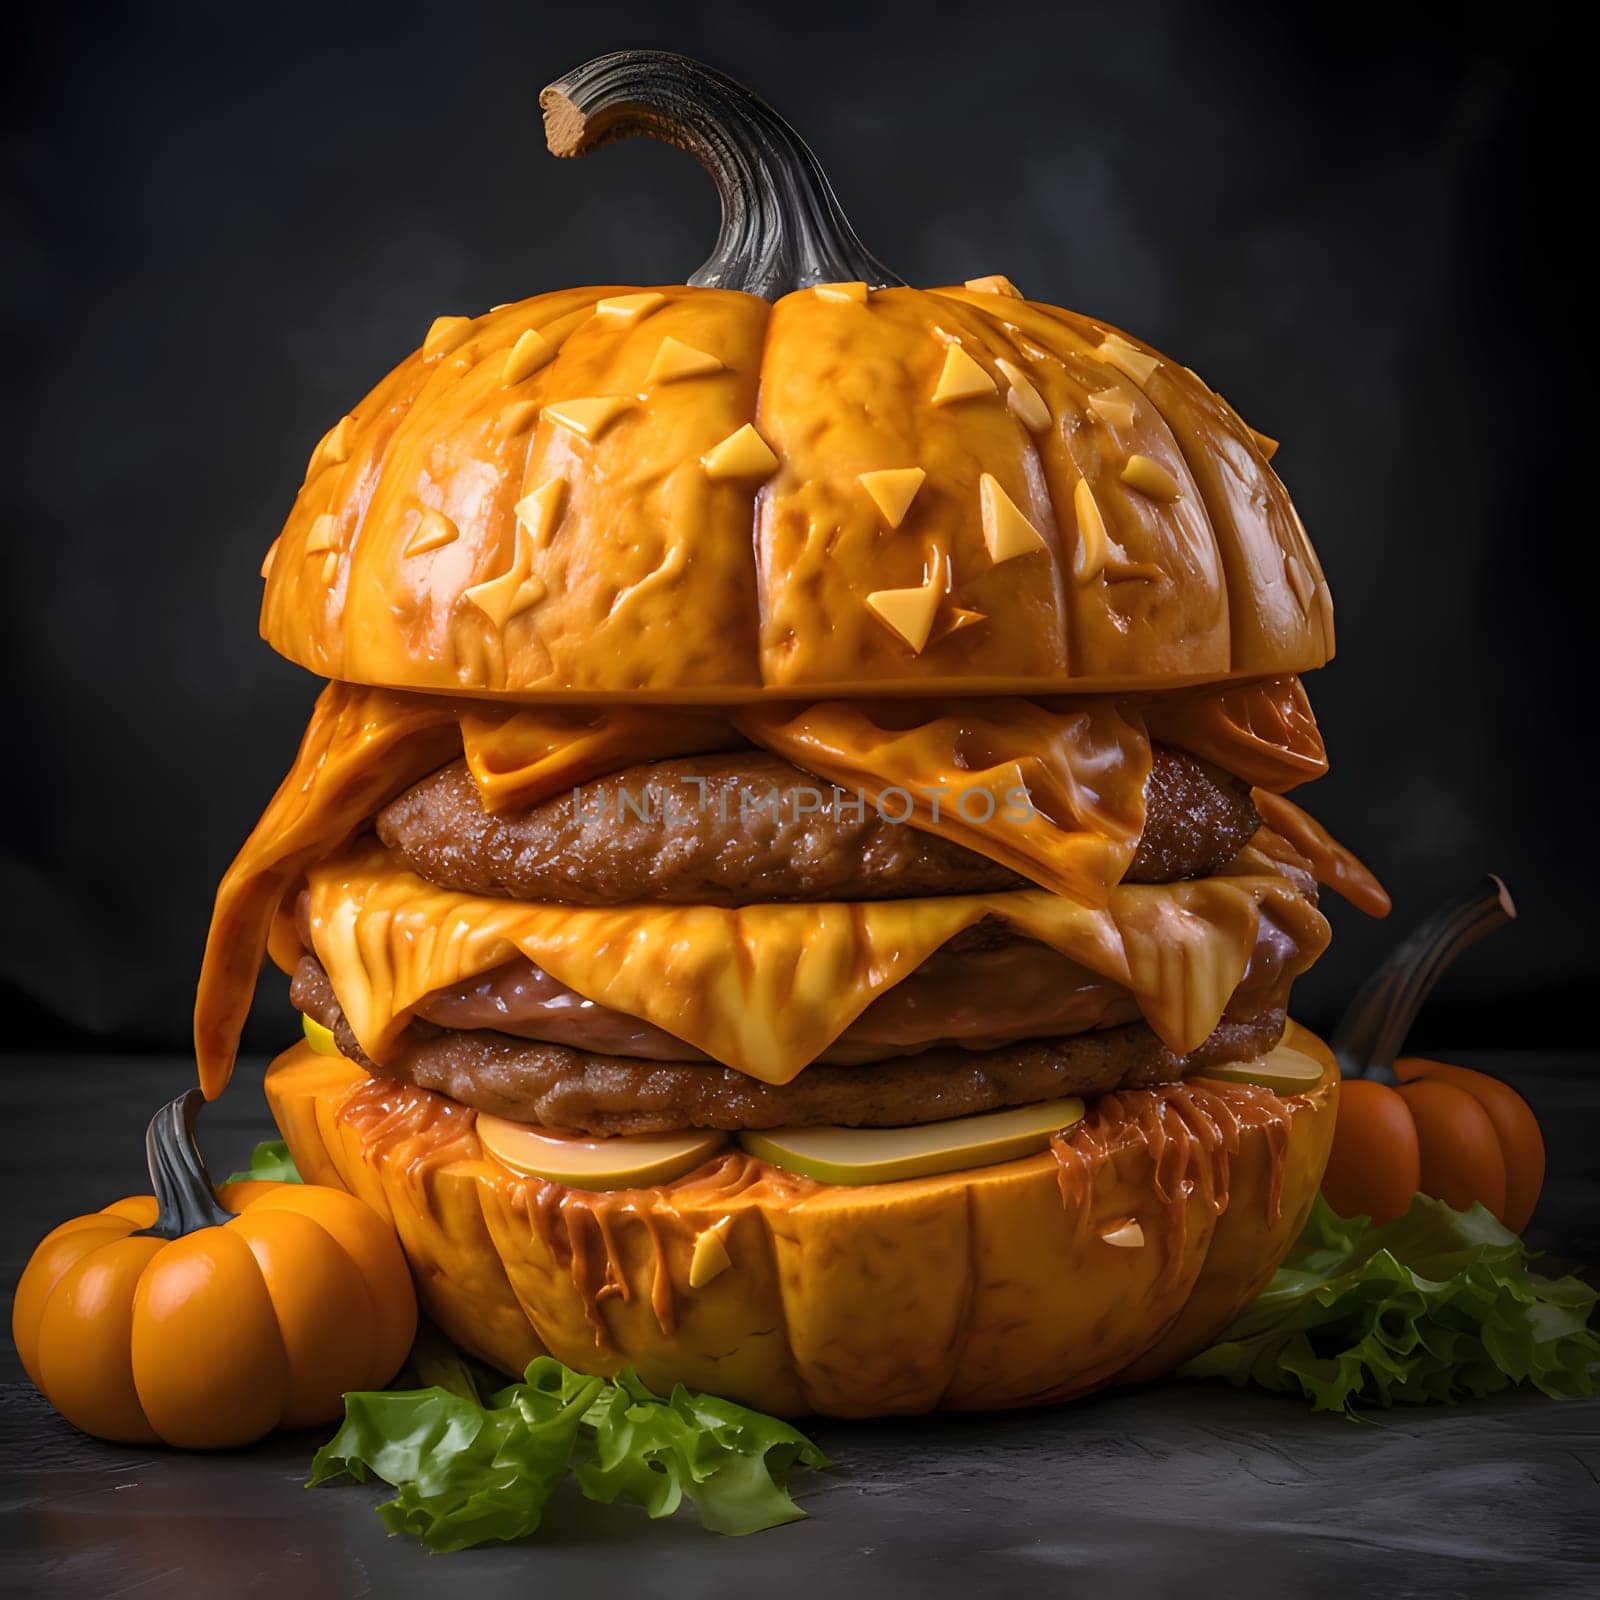 Pumpkin hamburger with meat cheese cucumber. Pumpkin as a dish of thanksgiving for the harvest. An atmosphere of joy and celebration.